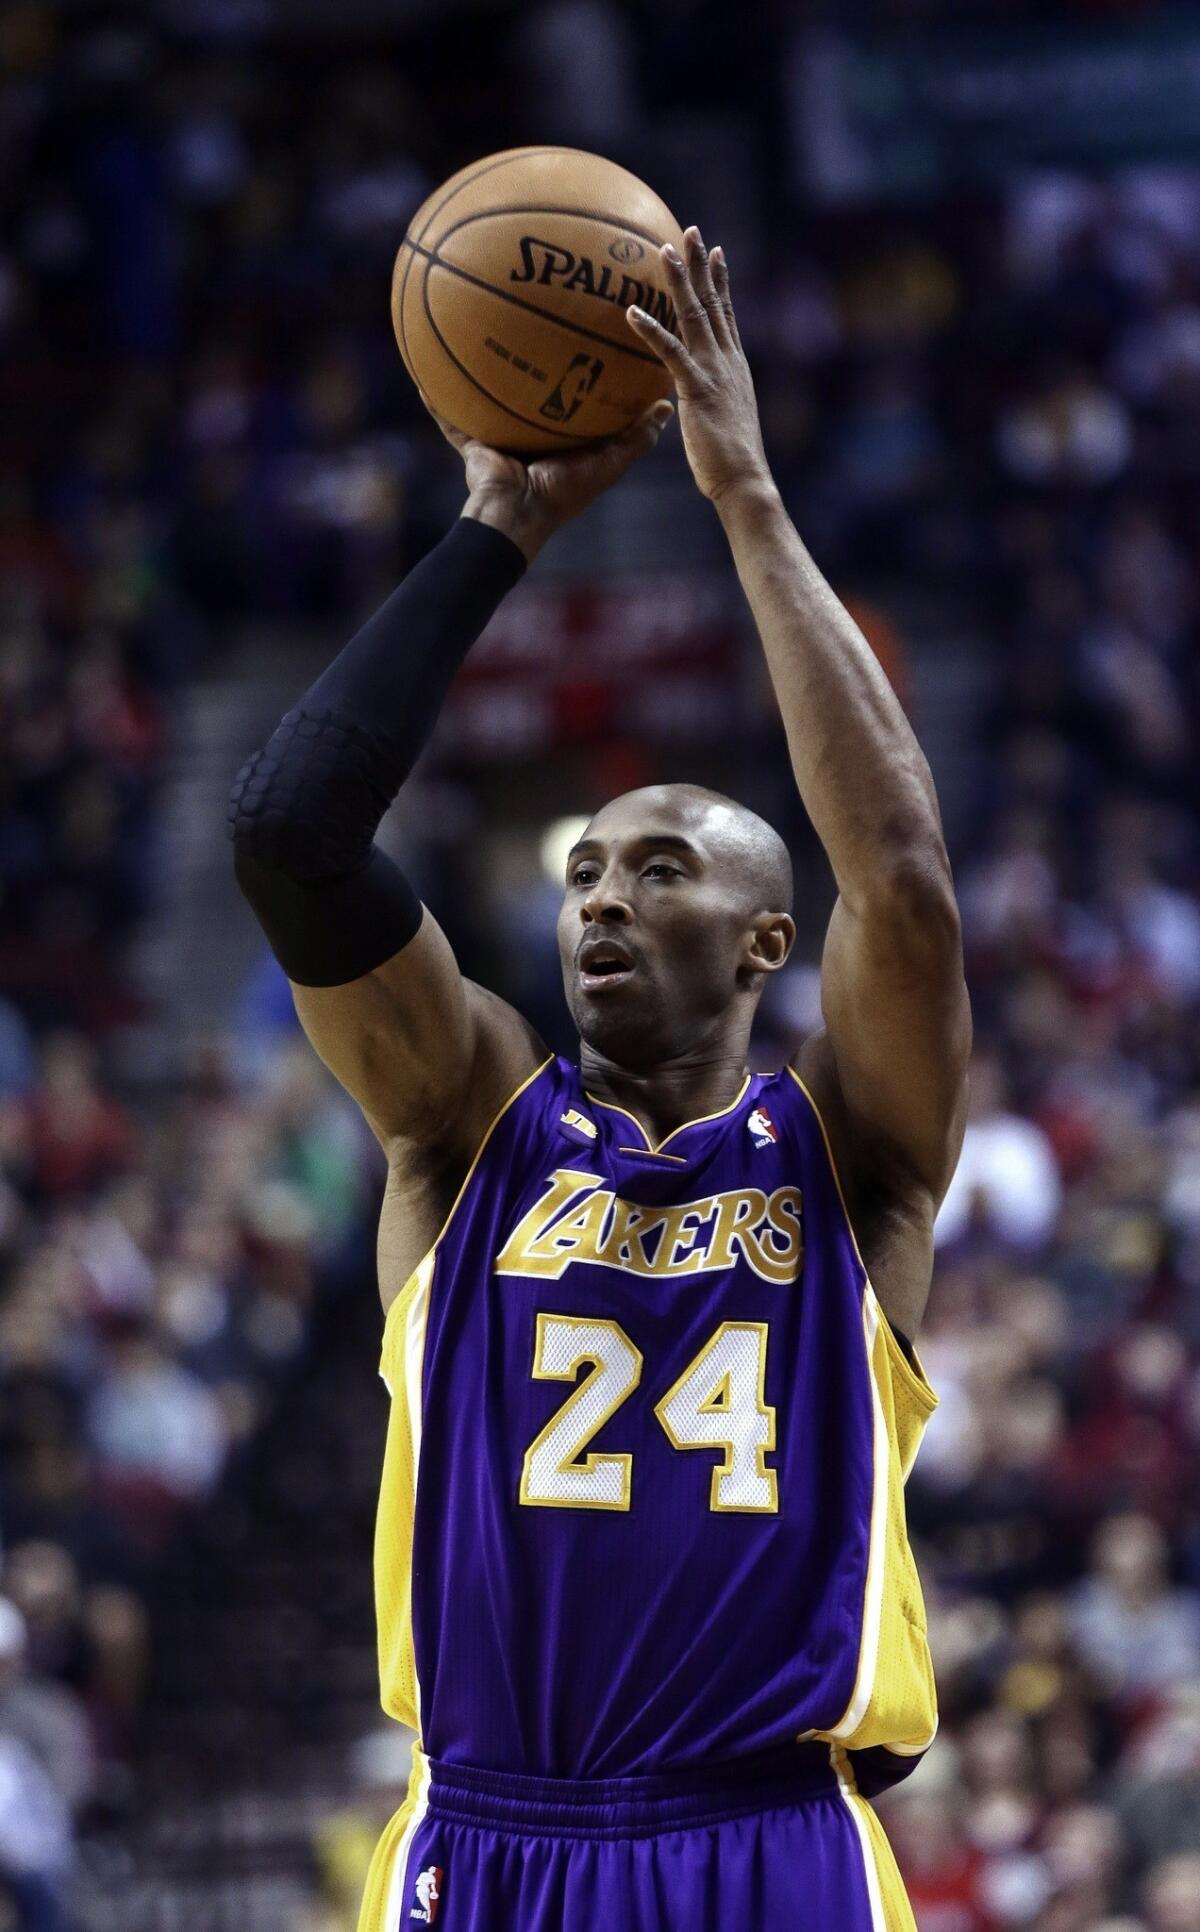 Lakers guard Kobe Bryant pulls up for a jumper against the Trail Blazers on Wednesday night.